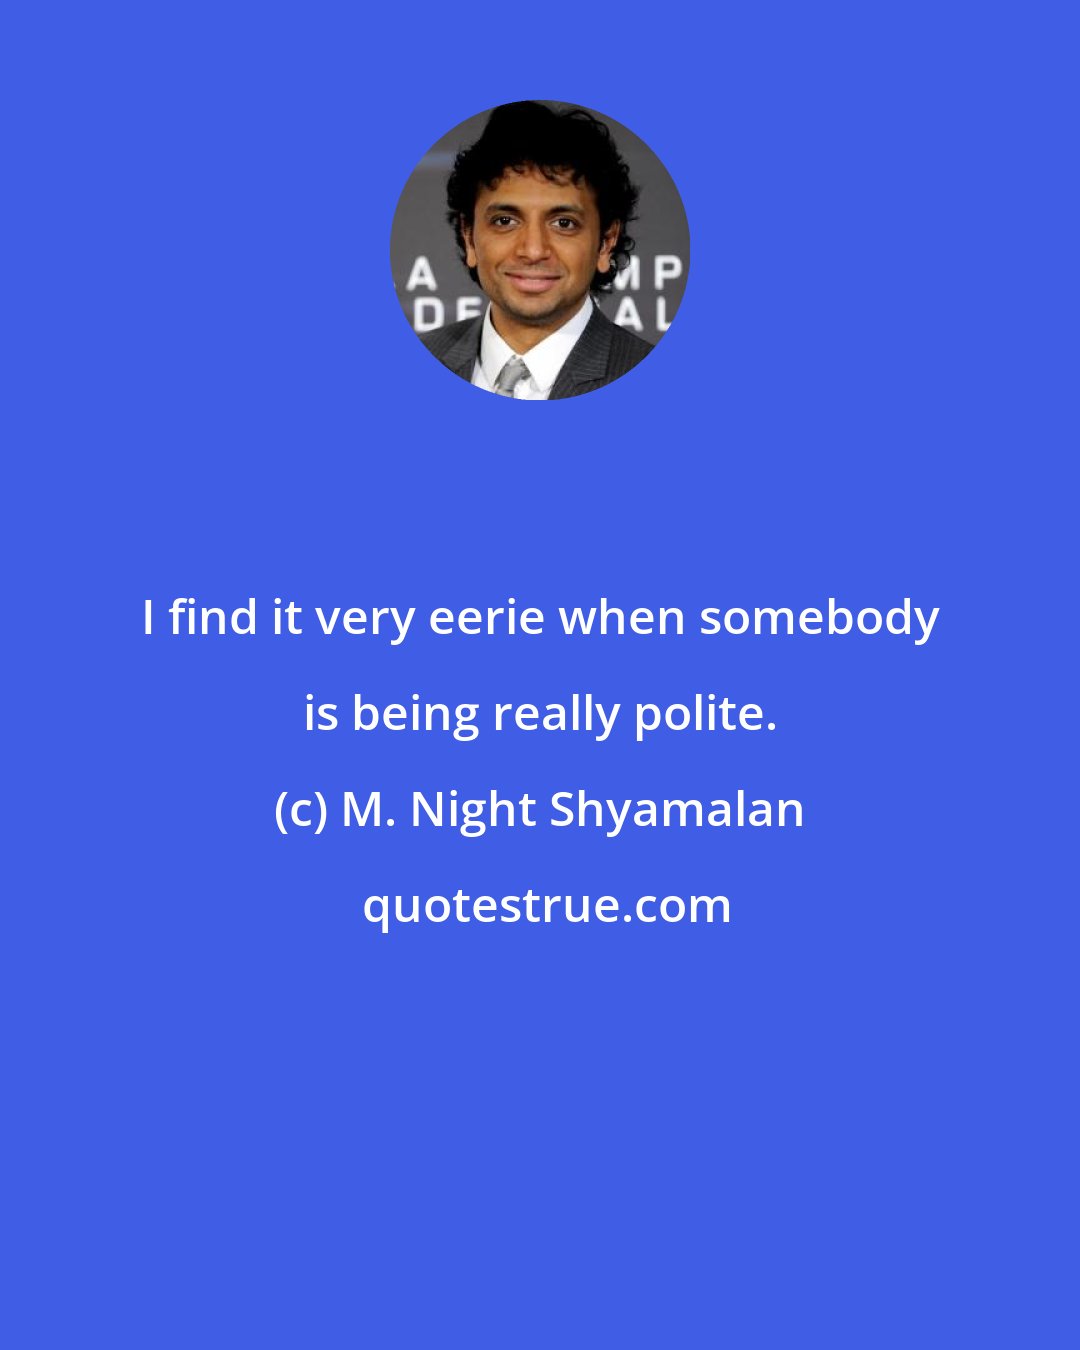 M. Night Shyamalan: I find it very eerie when somebody is being really polite.